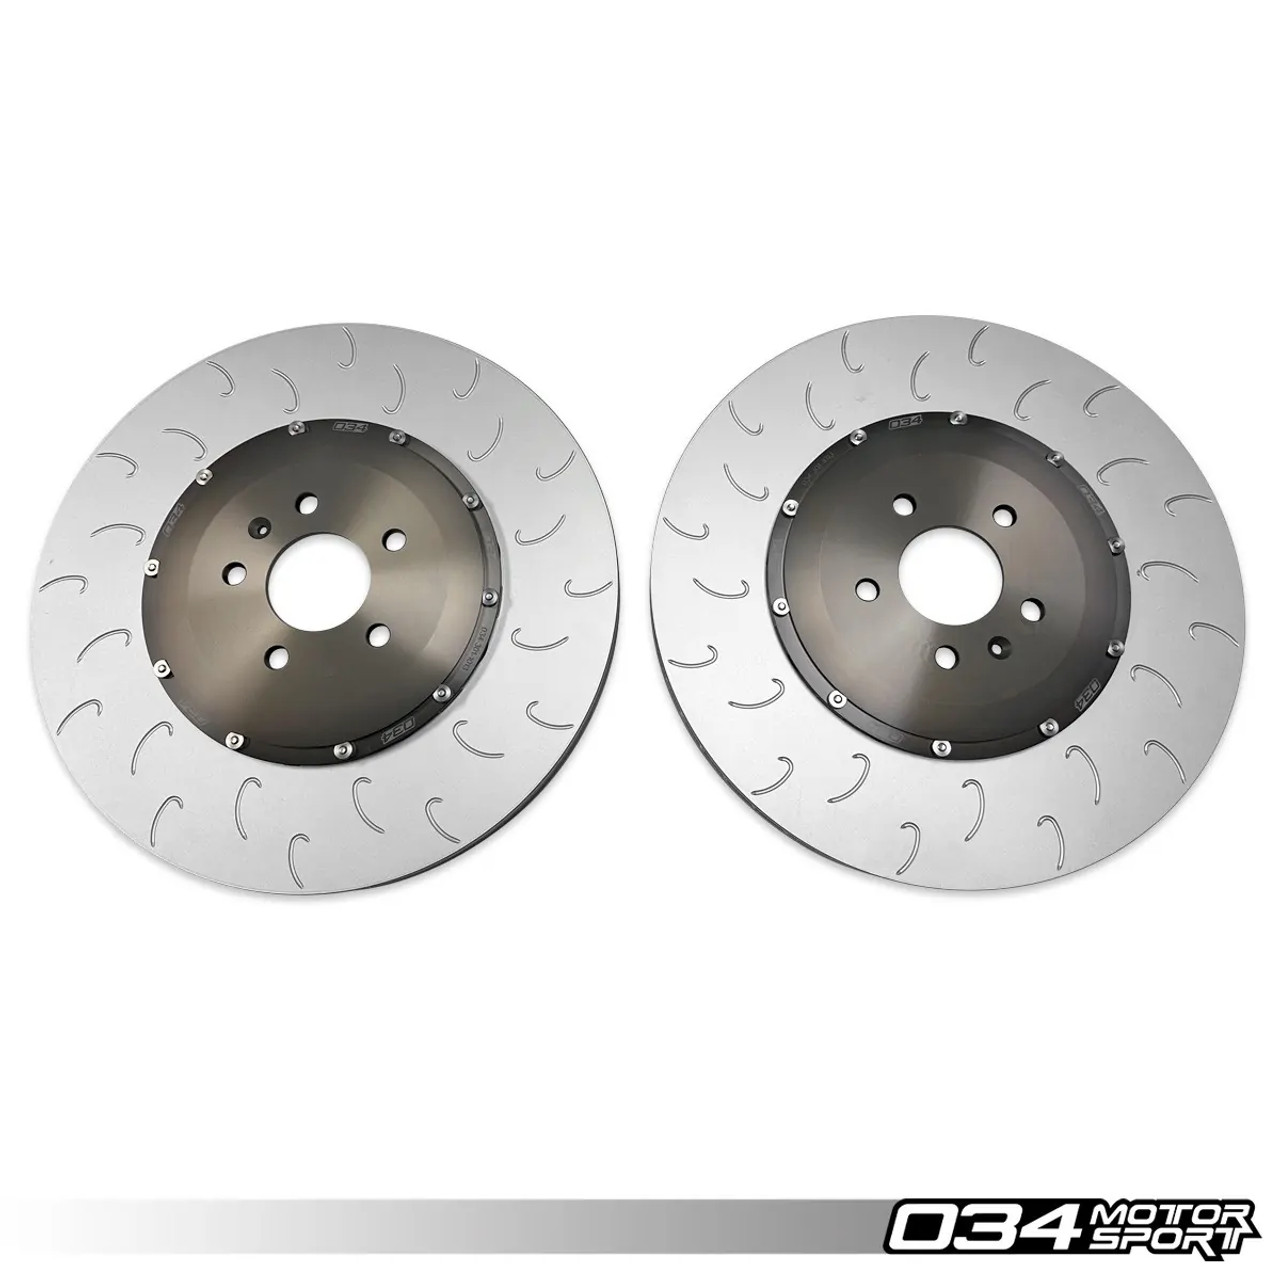 034Motorsport 2-Piece Floating Front Rotor Upgrade Kit for C7 S6 & S7